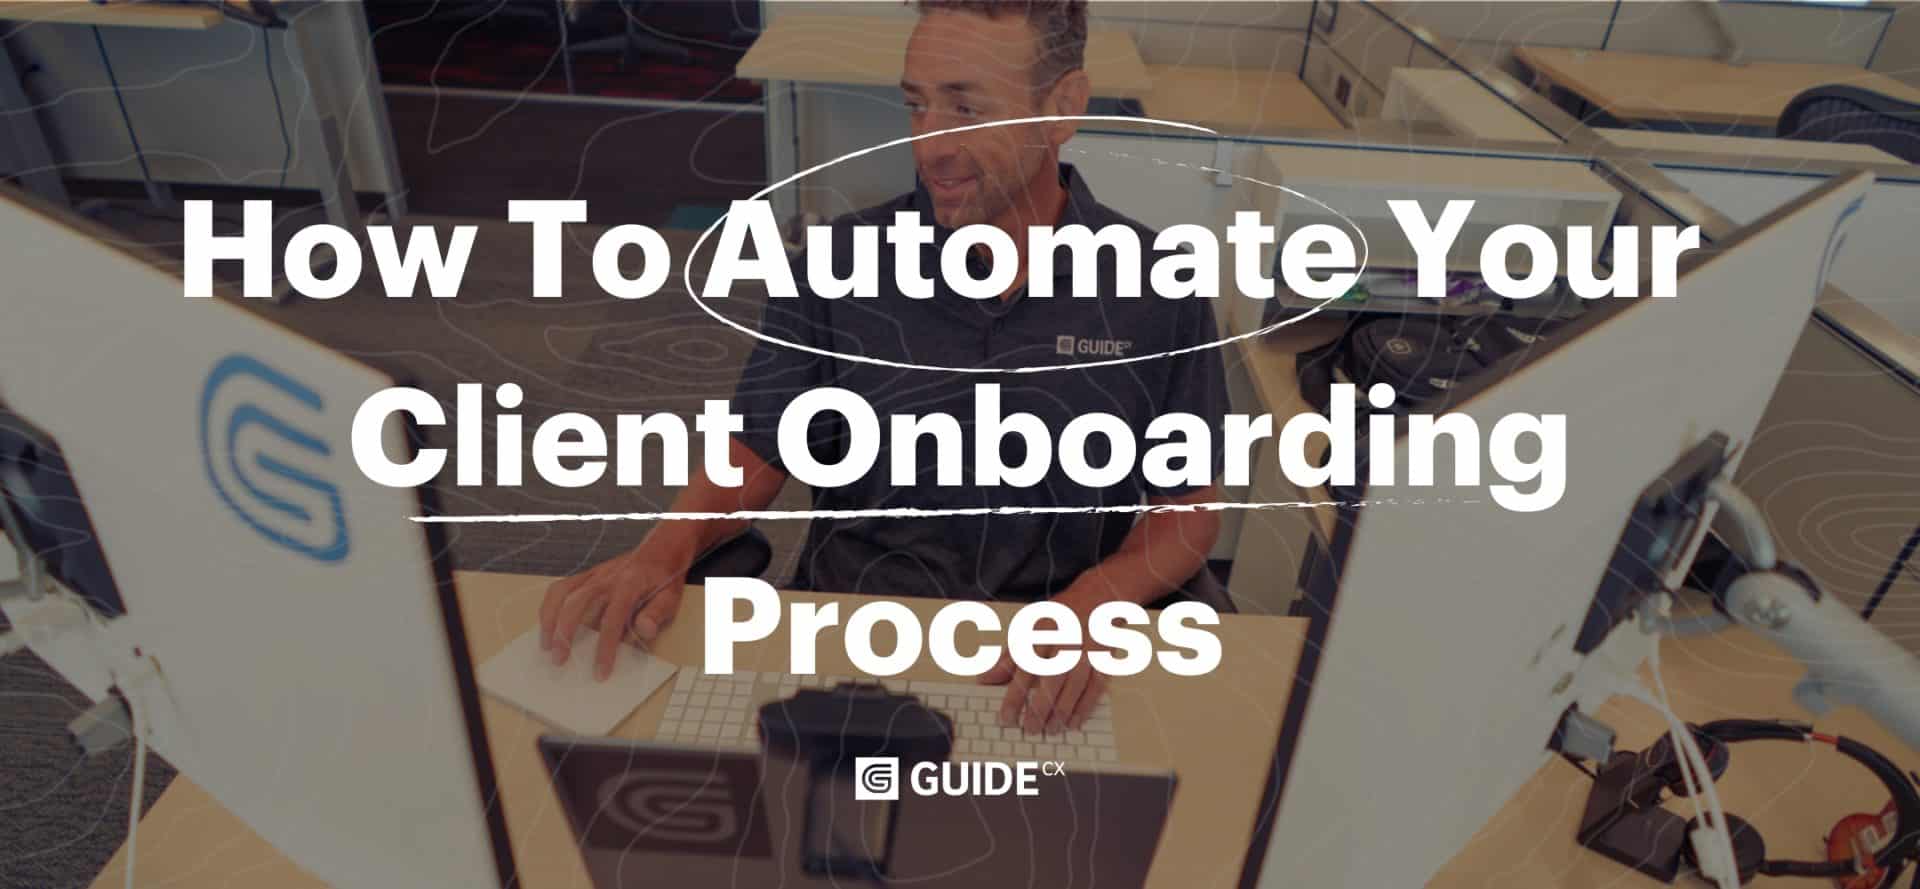 How to Automate Your Client Onboarding Process